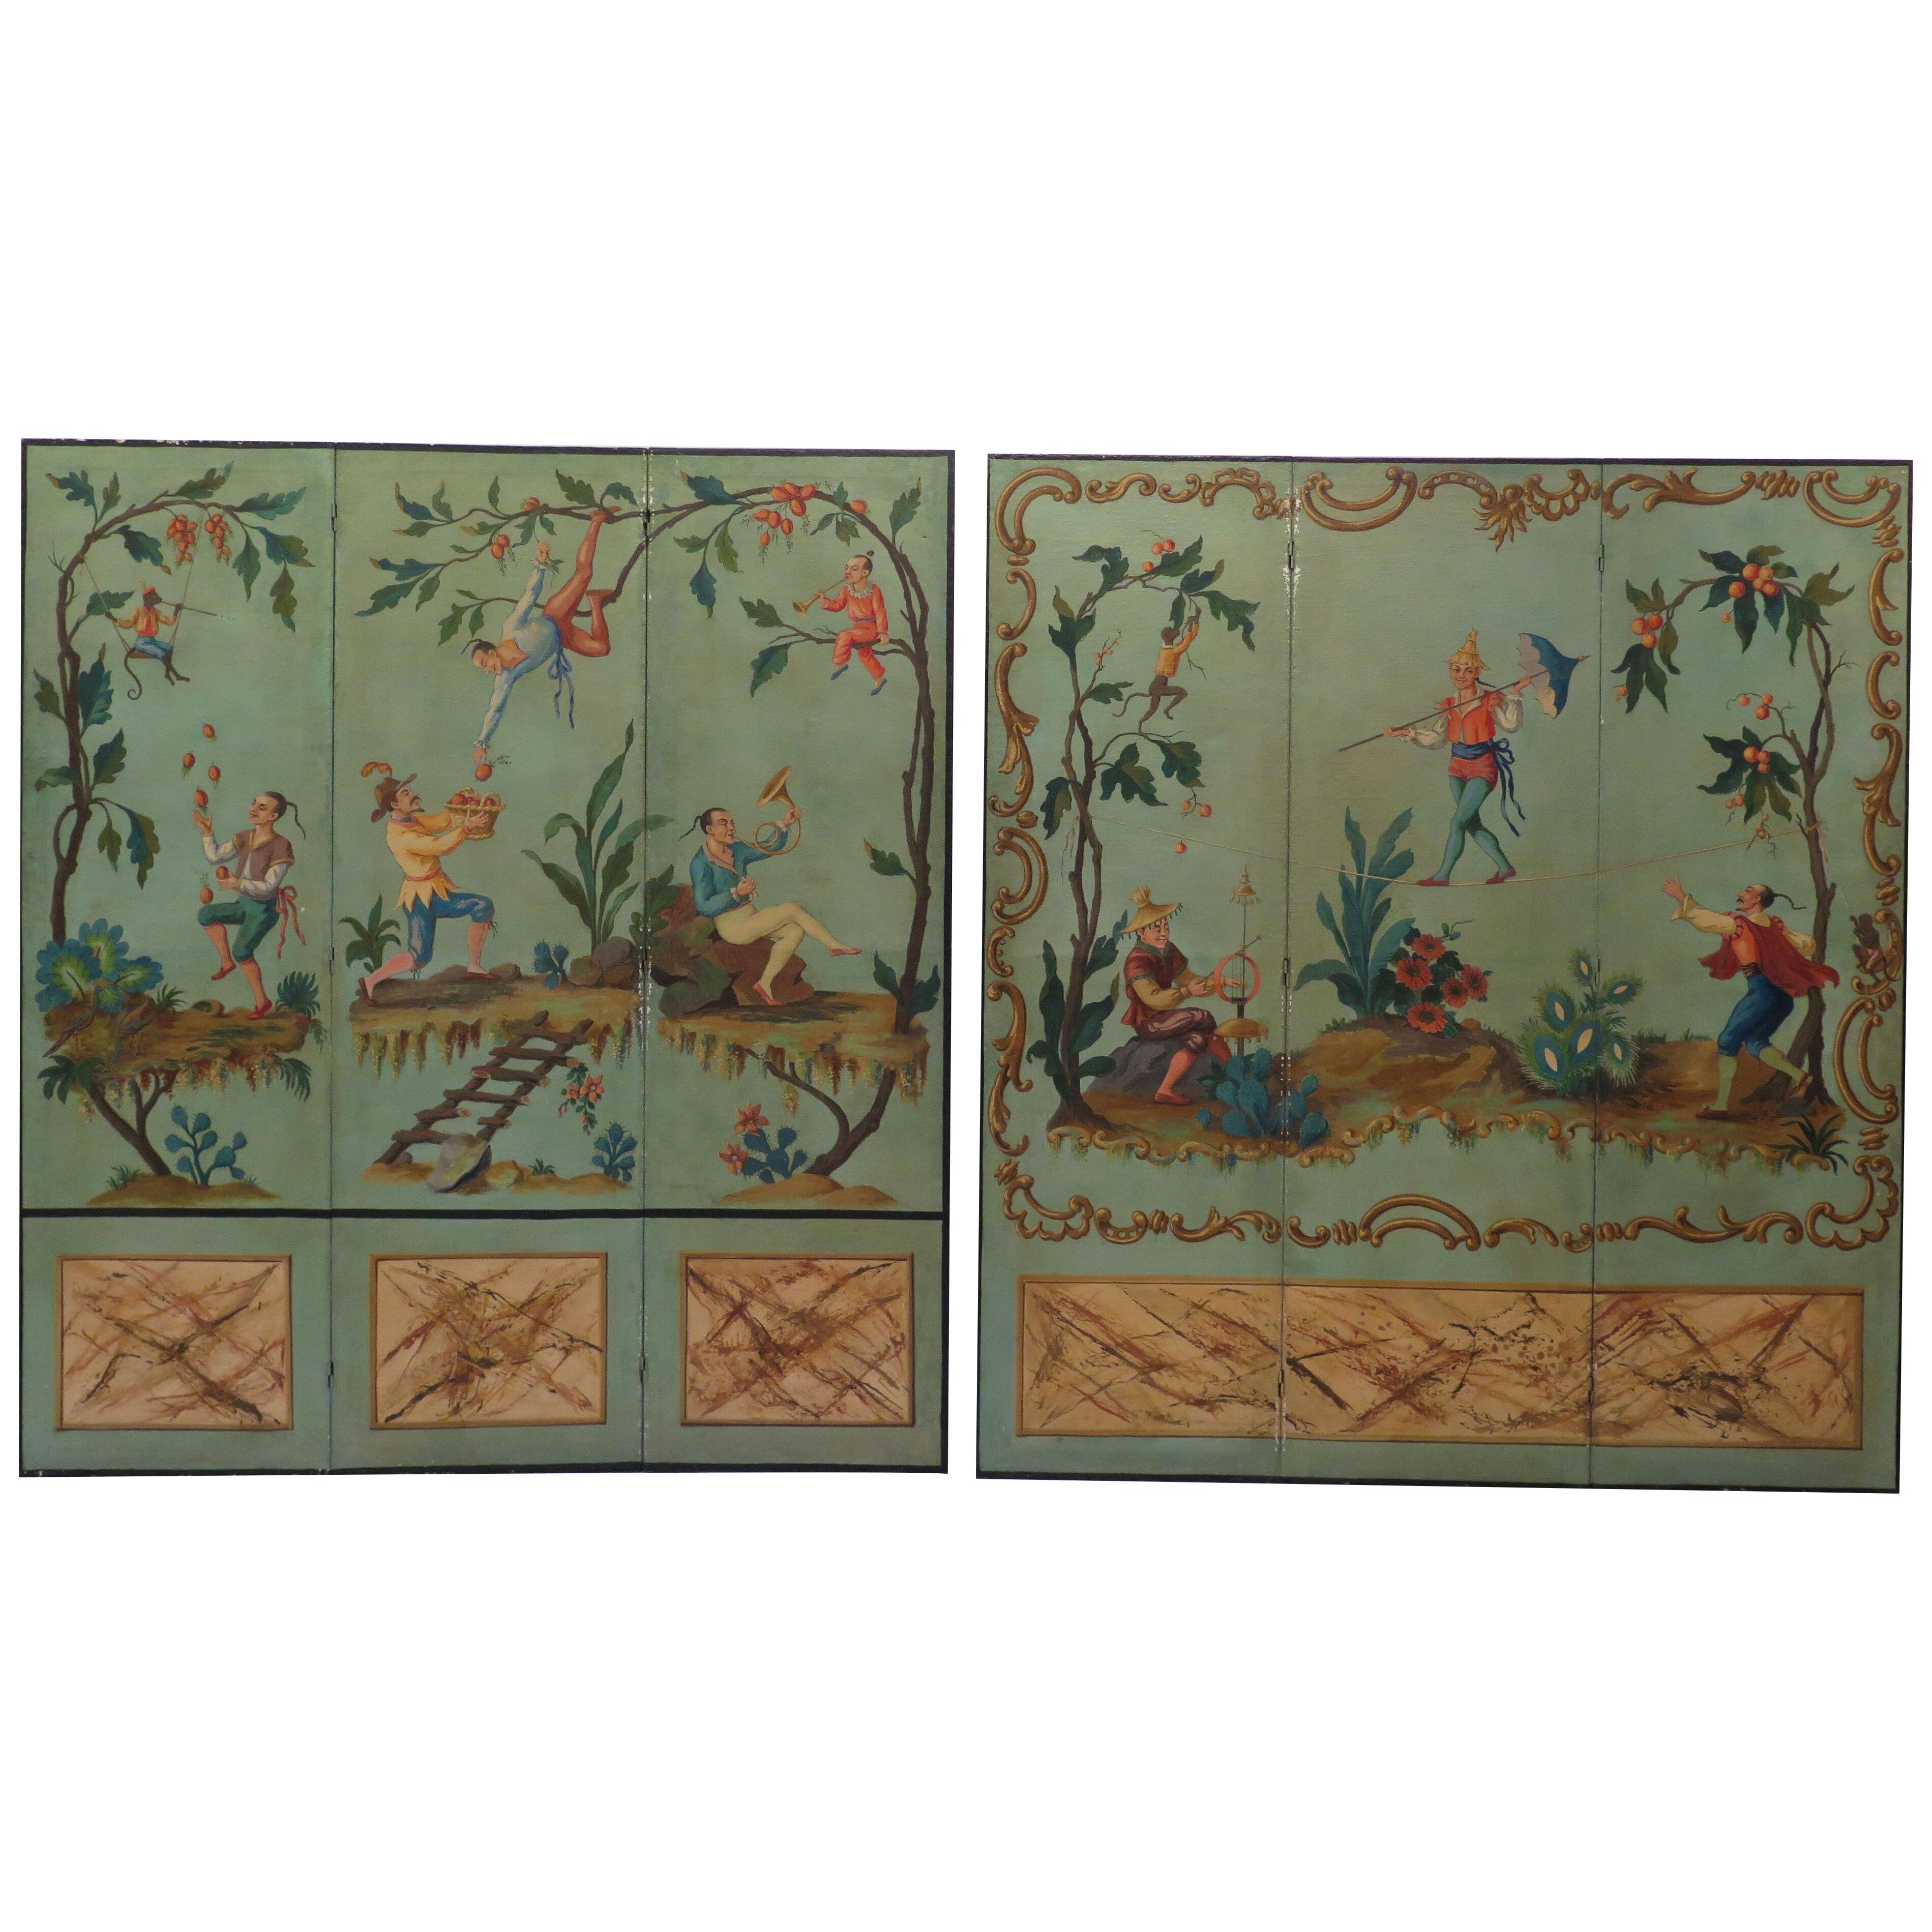 A Pair (Near) of Oil on Canvas French Chinoiserie Three-Panel Screens